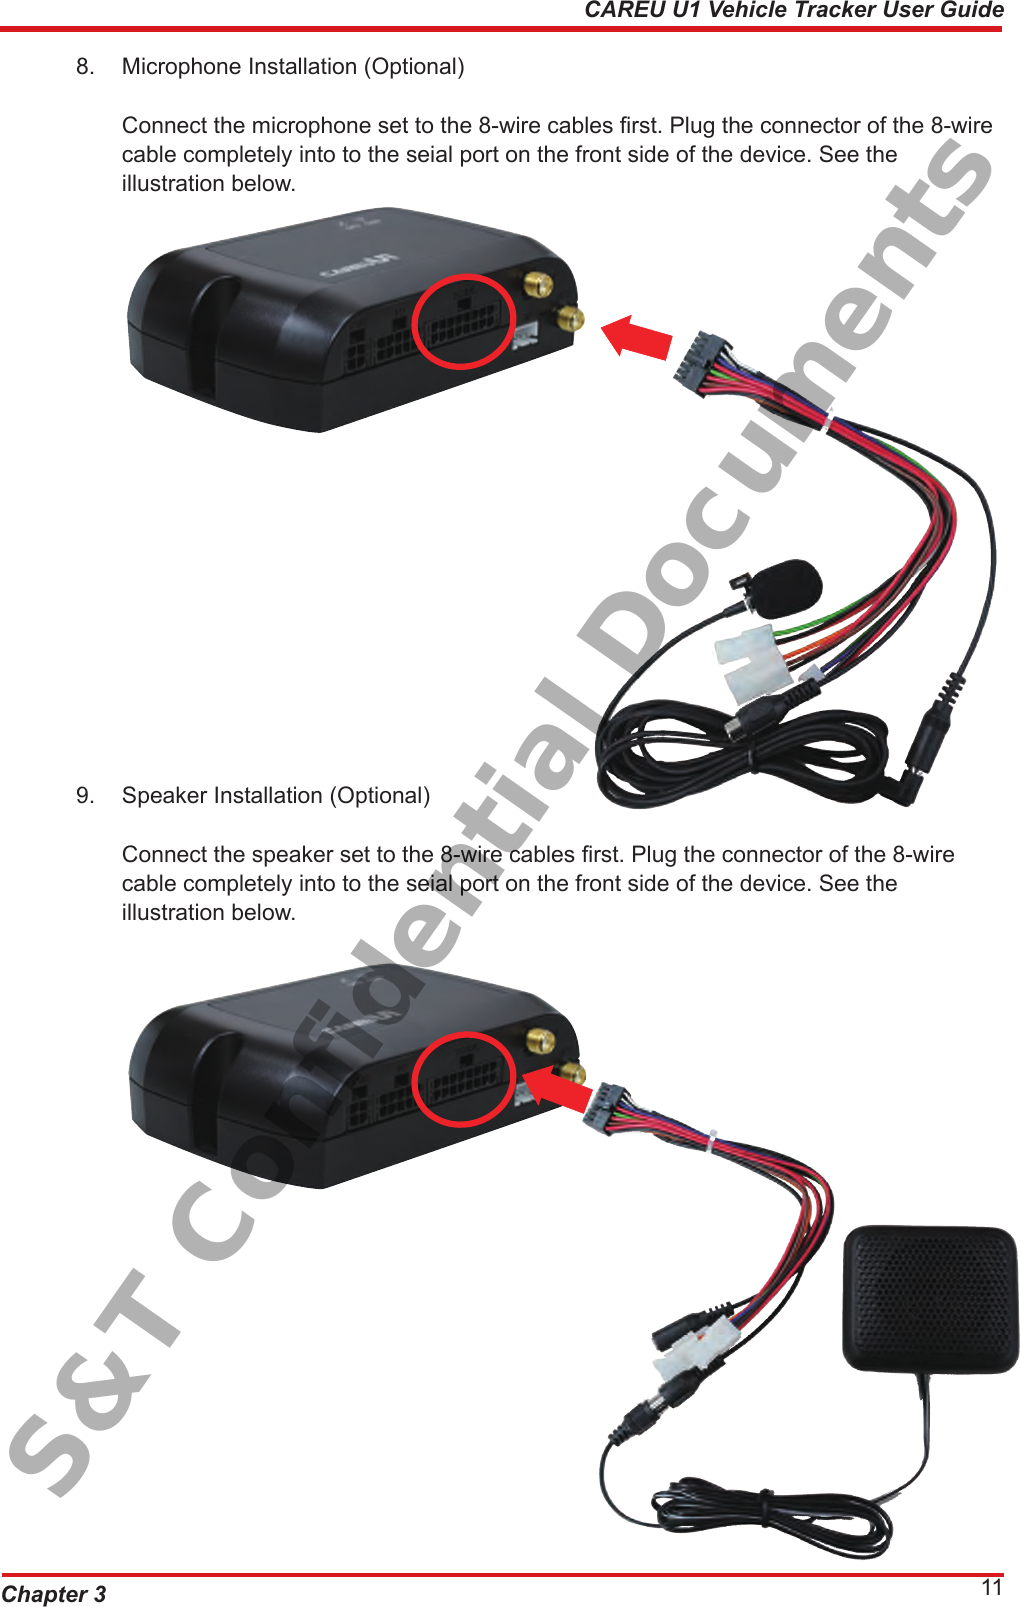 Chapter 3 11CAREU U1 Vehicle Tracker User Guide8.  Microphone Installation (Optional)       Connect the microphone set to the 8-wire cables rst. Plug the connector of the 8-wire      cable completely into to the seial port on the front side of the device. See the        illustration below. 9.  Speaker Installation (Optional)       Connect the speaker set to the 8-wire cables rst. Plug the connector of the 8-wire        cable completely into to the seial port on the front side of the device. See the        illustration below.S&amp;T Confidential Documents